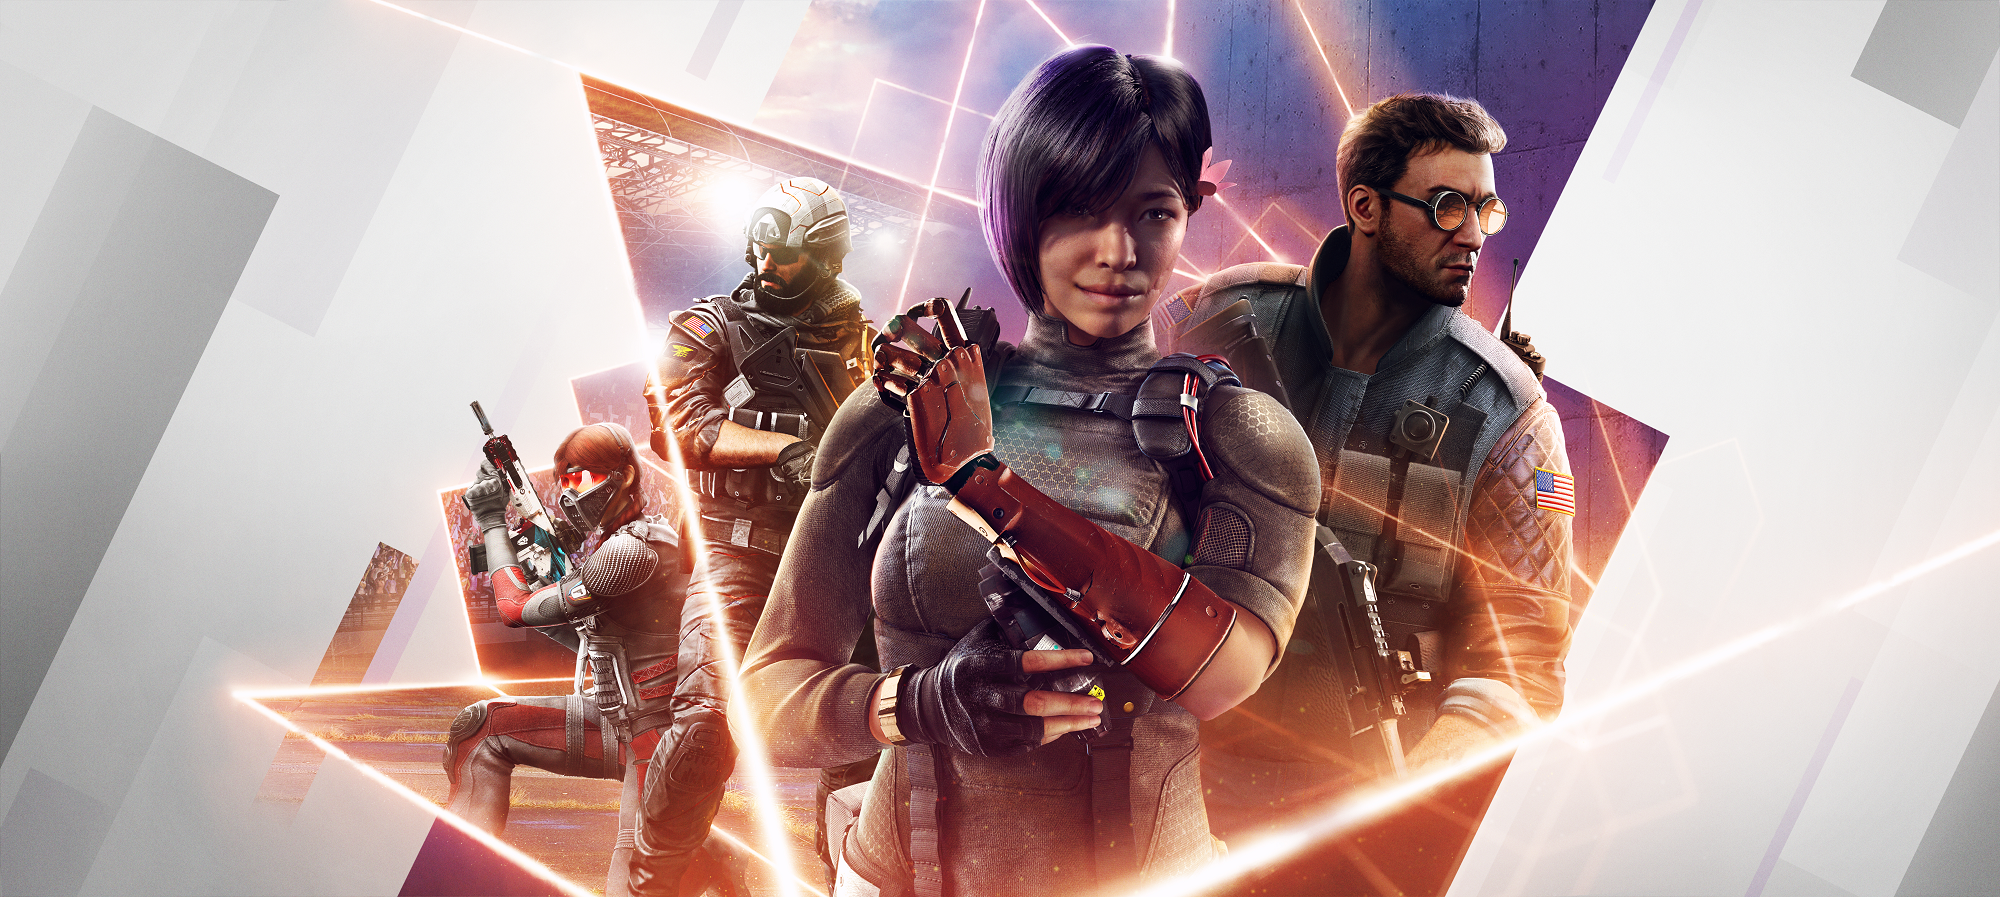 Ubisoft® Reveals its Plans for the Six Invitational 2021 and the 2021 Tom Clancy’s Rainbow Six® Esports Season in Each Region